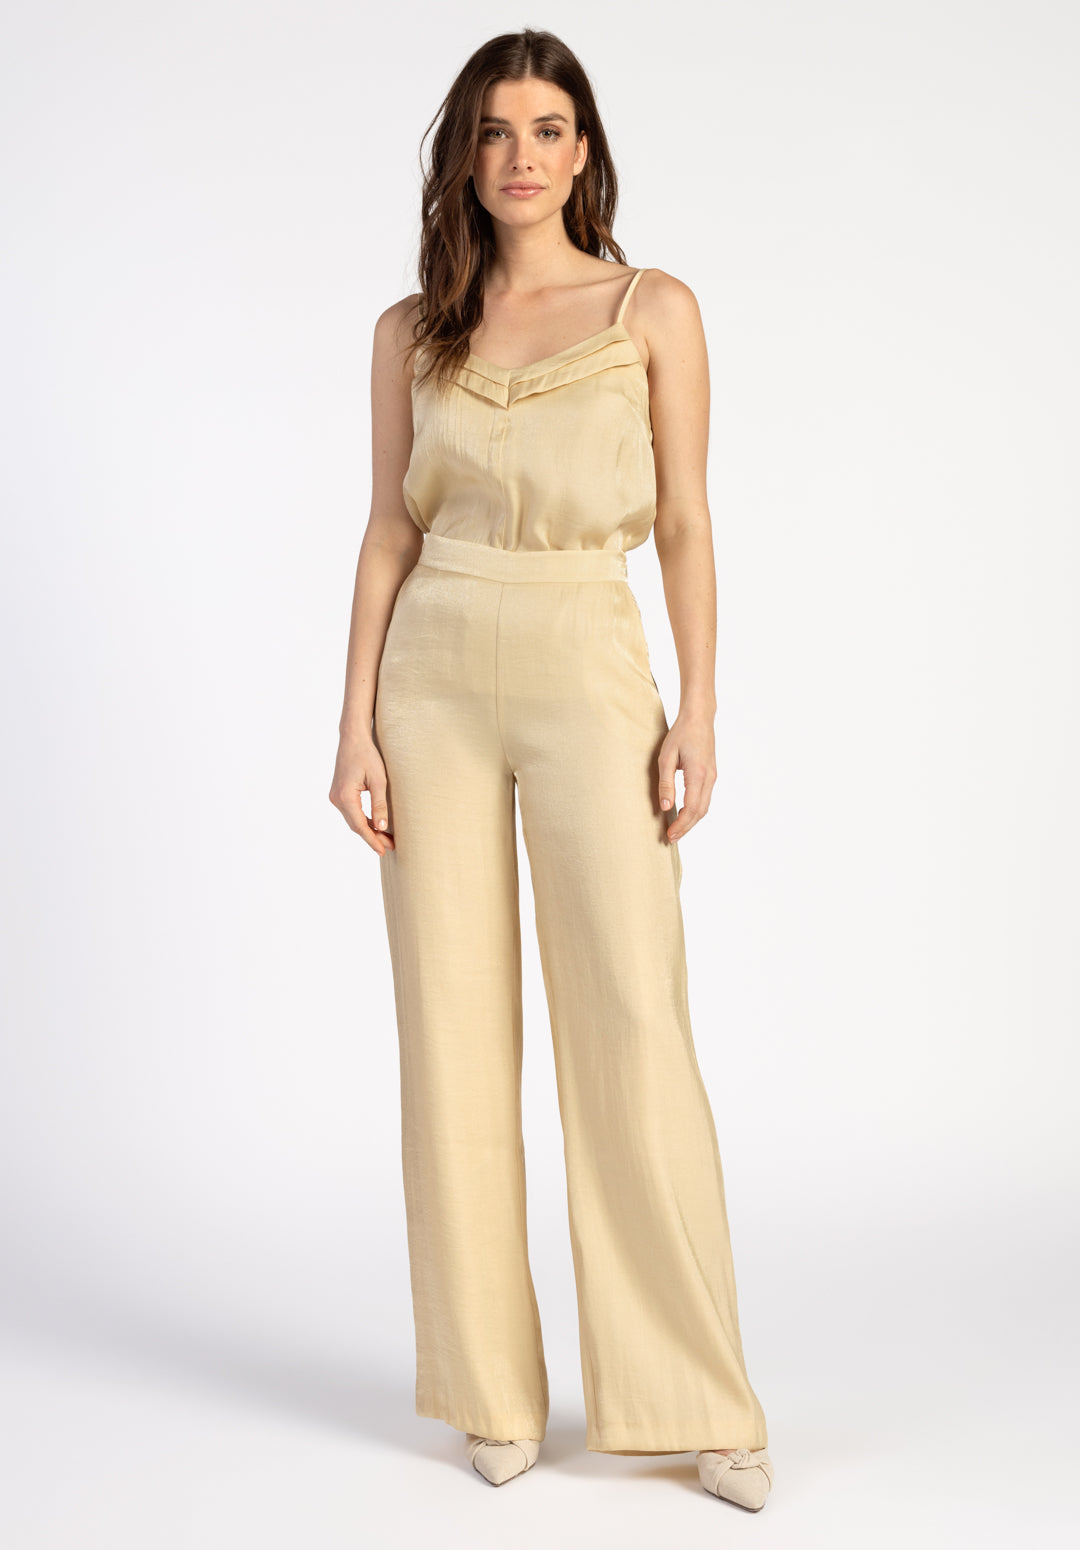 Searle Shimmery Pants Sand